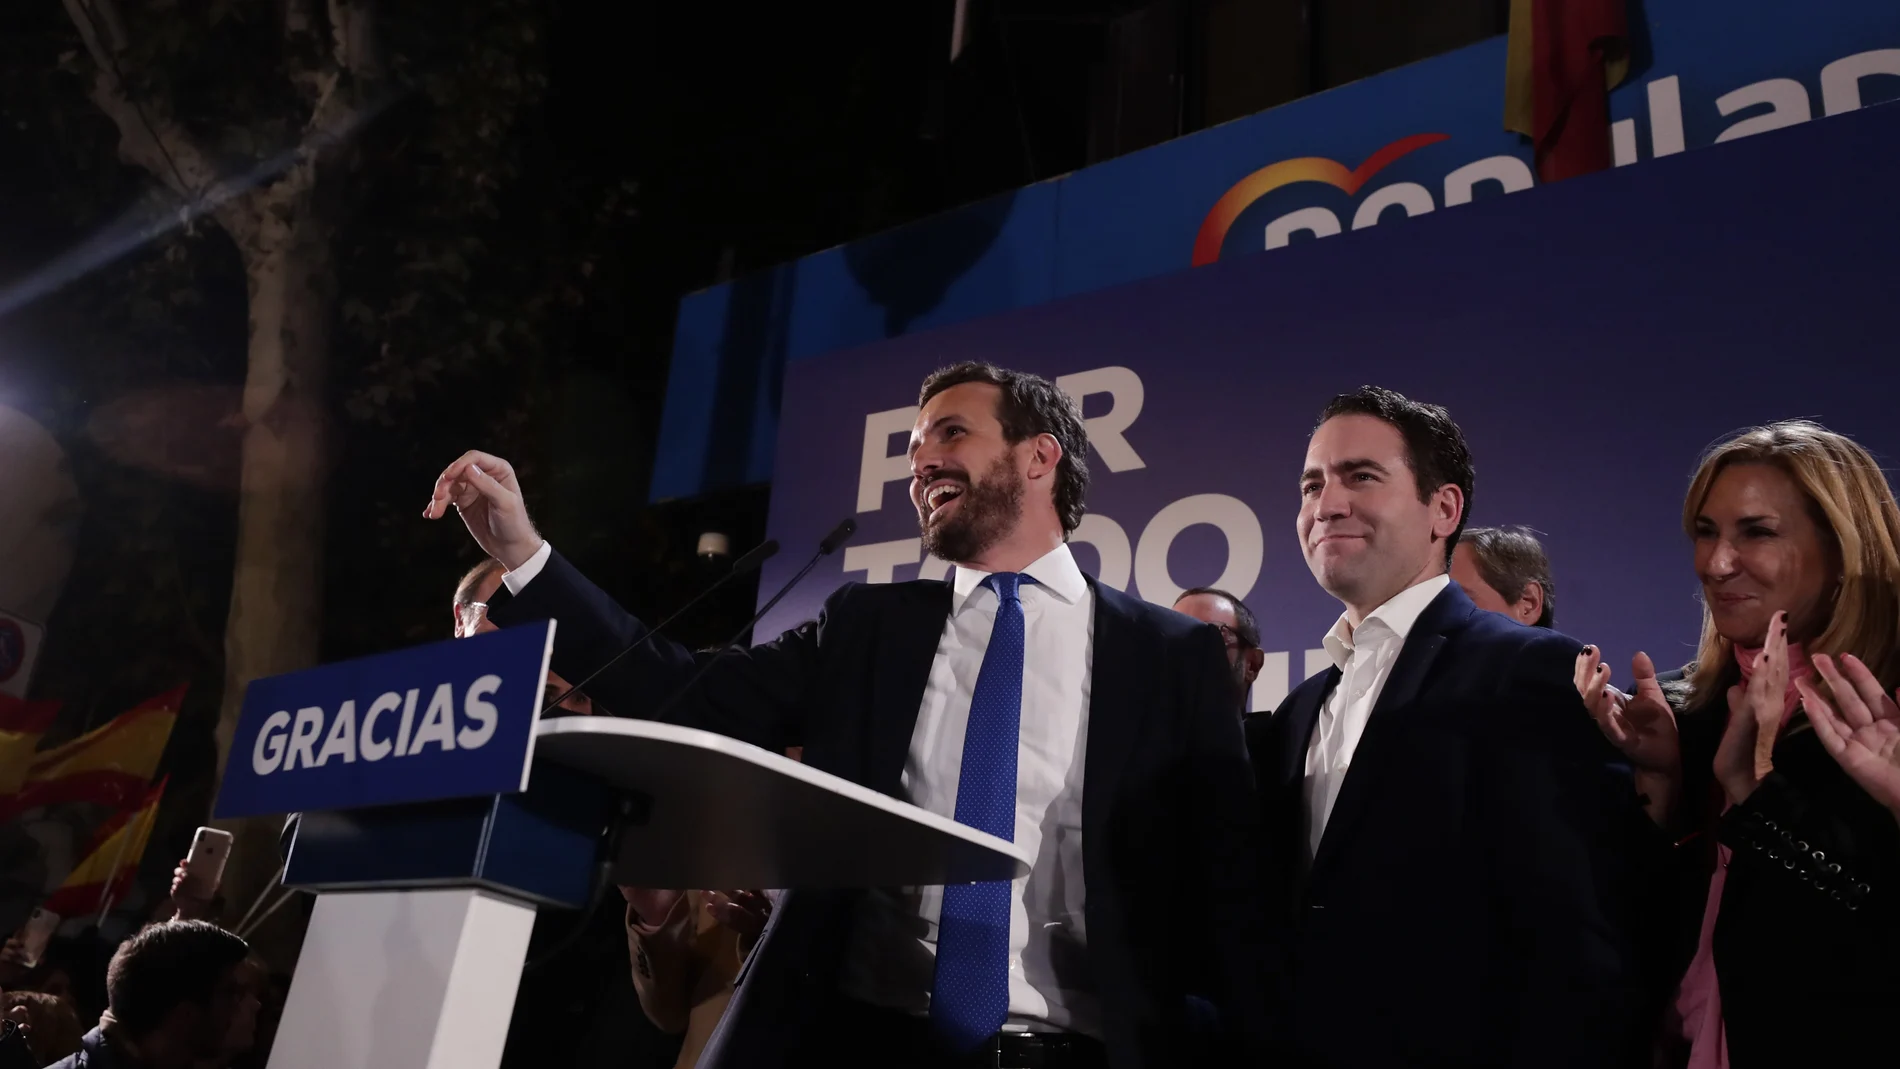 Conservative Popular Party leader Pablo Casado appears outside the party headquarters after the announcement of almost 100 per cent of the general election results in Madrid, Spain, Monday, Nov. 11, 2019. Spain's Interior Ministry says that results show Socialists winning Spain's national election, but without a clear end to the country's political deadlock. (AP Photo/Manu Fernandez)